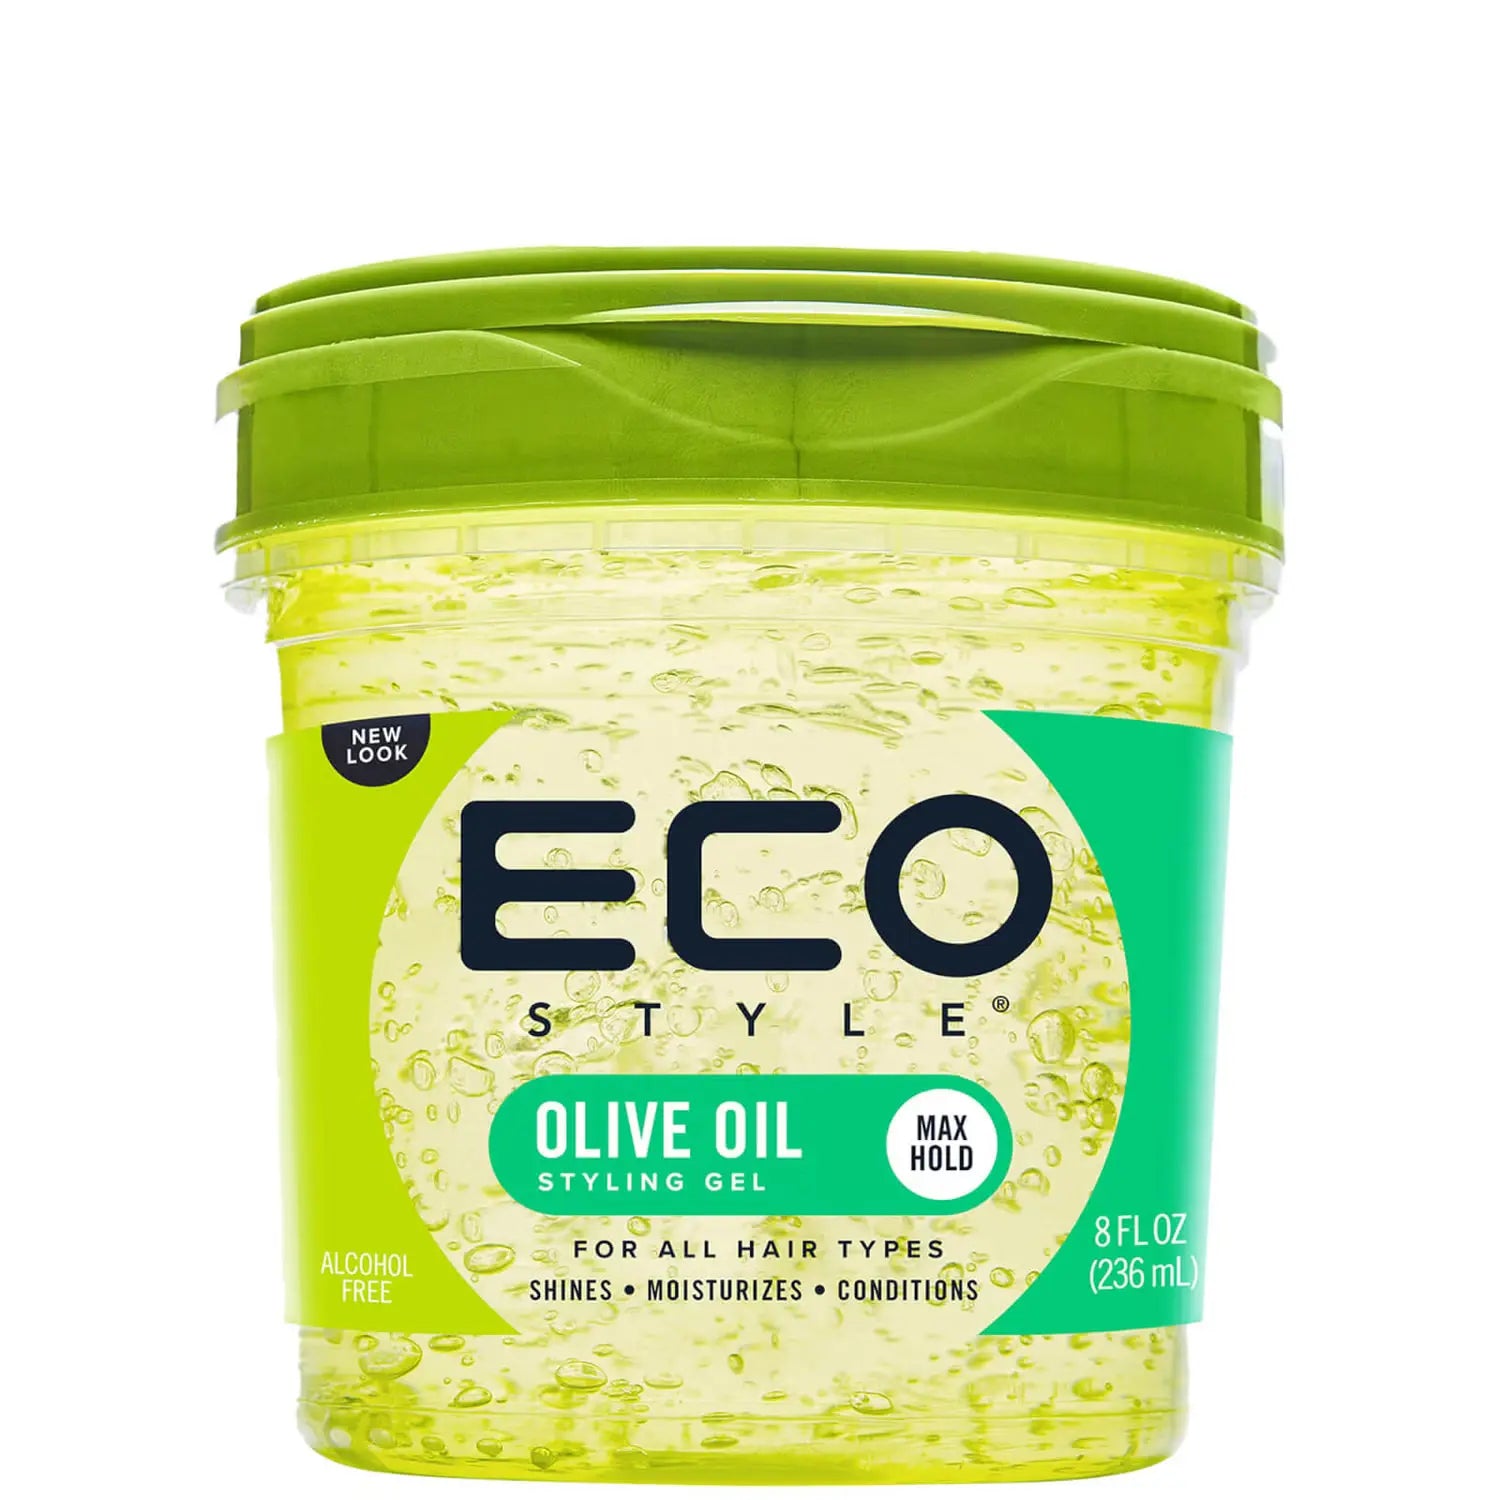 Ecostyle-Styling gel Olive Oil 236ml